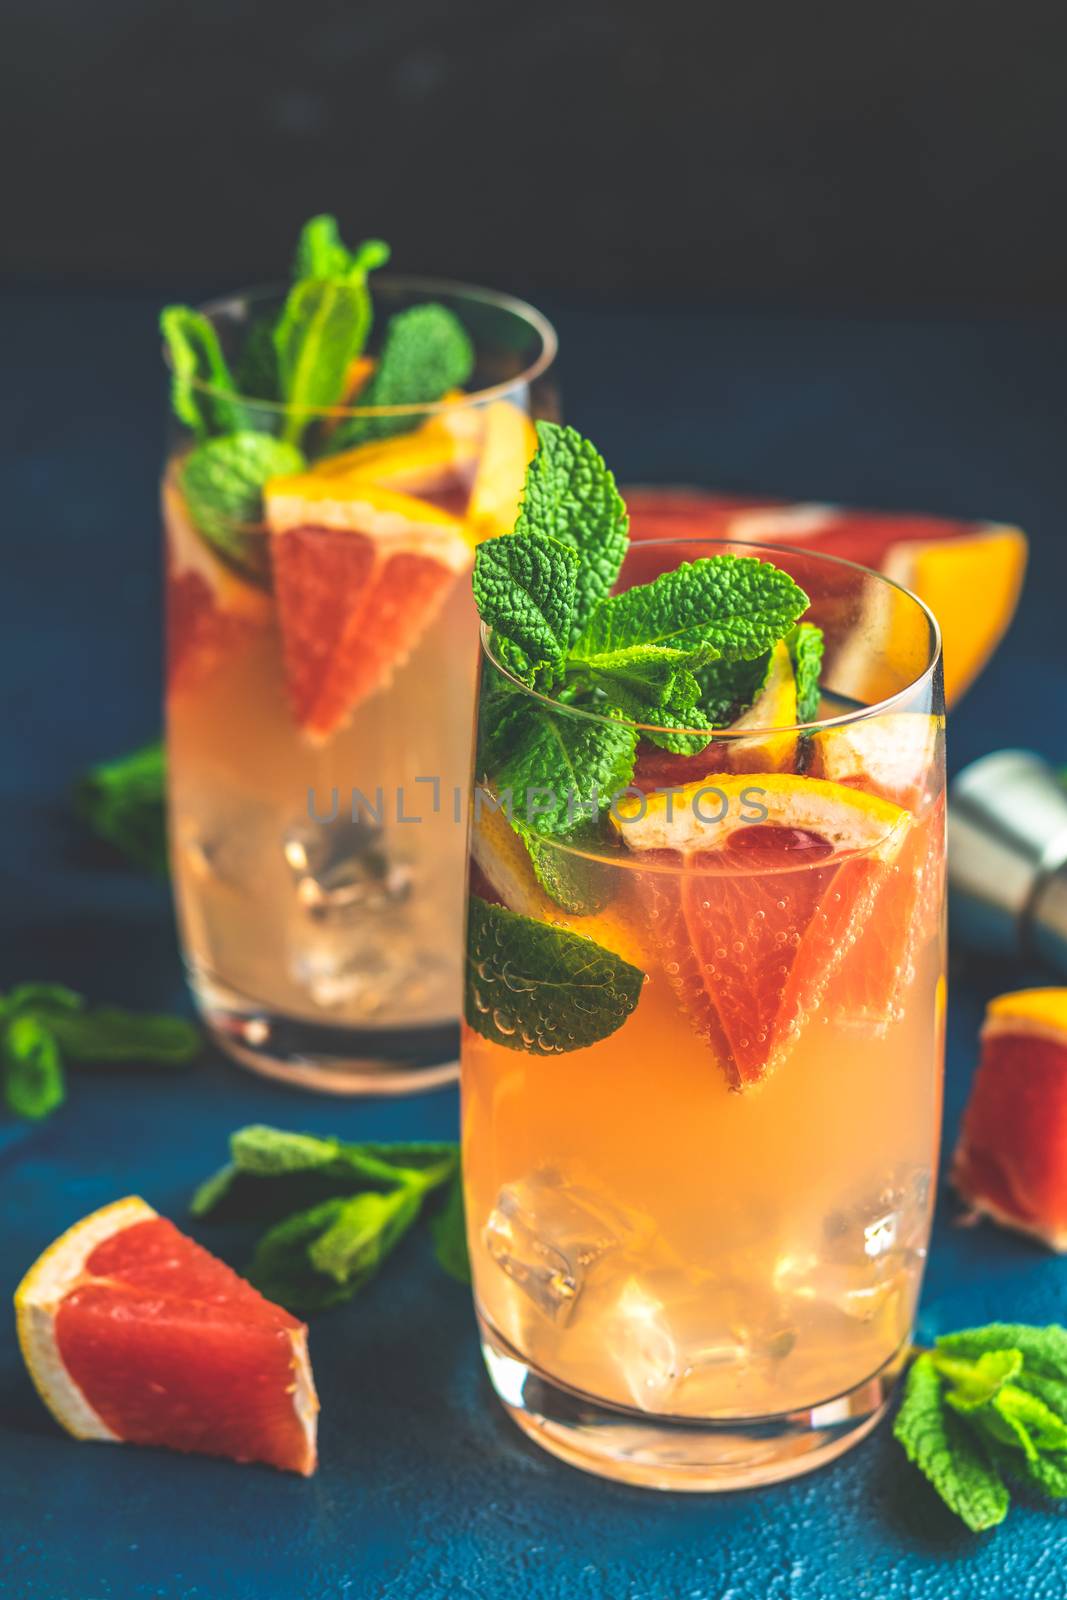 Grapefruit and mint gin tonic drink by ArtSvitlyna